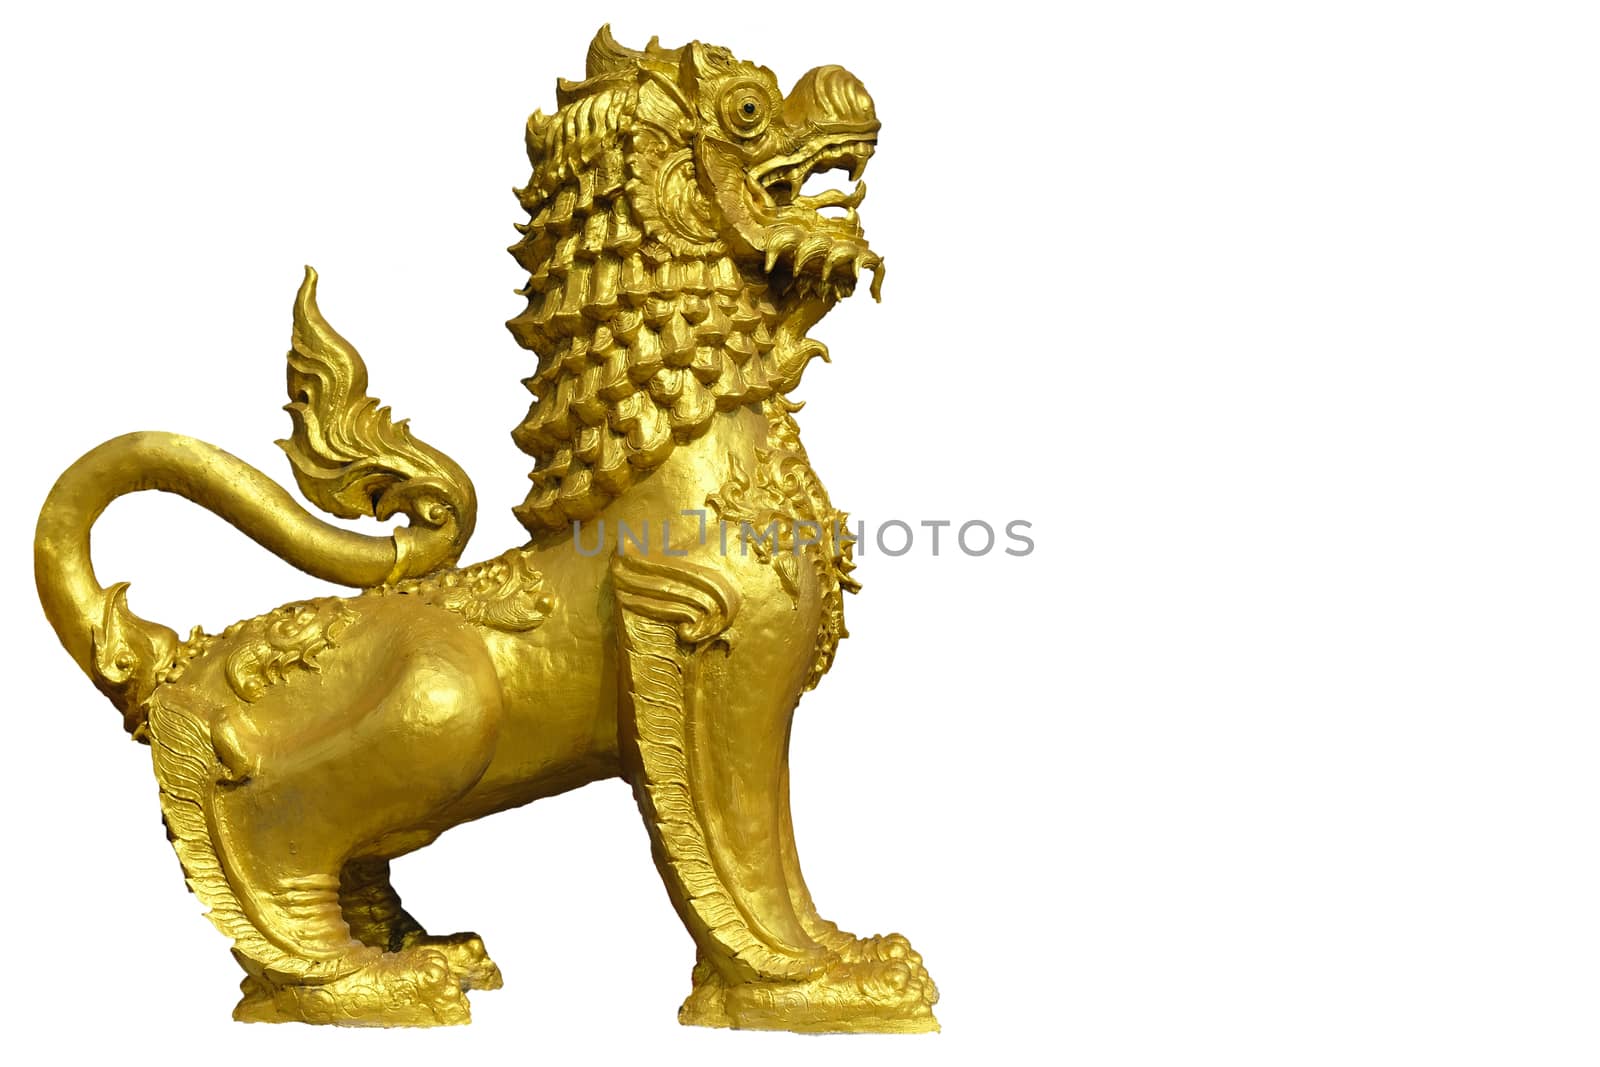 The golden lion sculpture by Nawoot